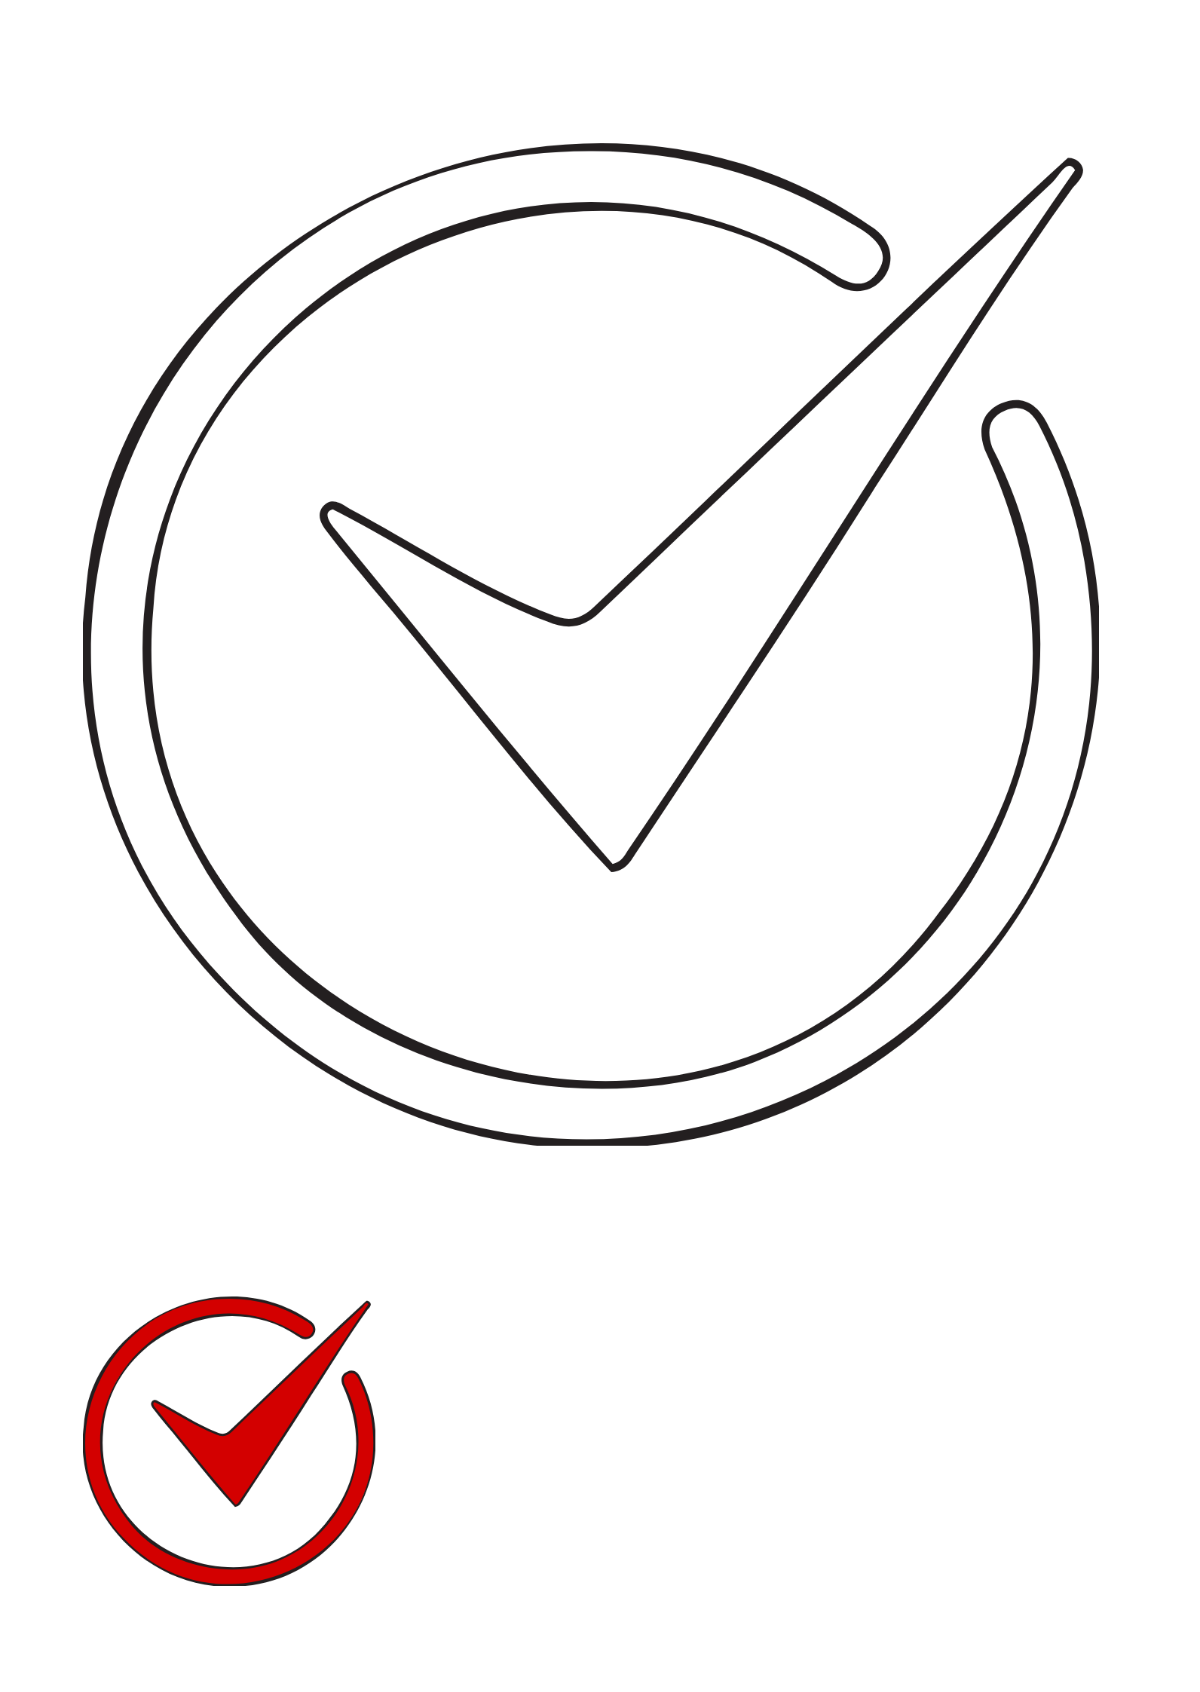 Red Checkmark Coloring Page Template